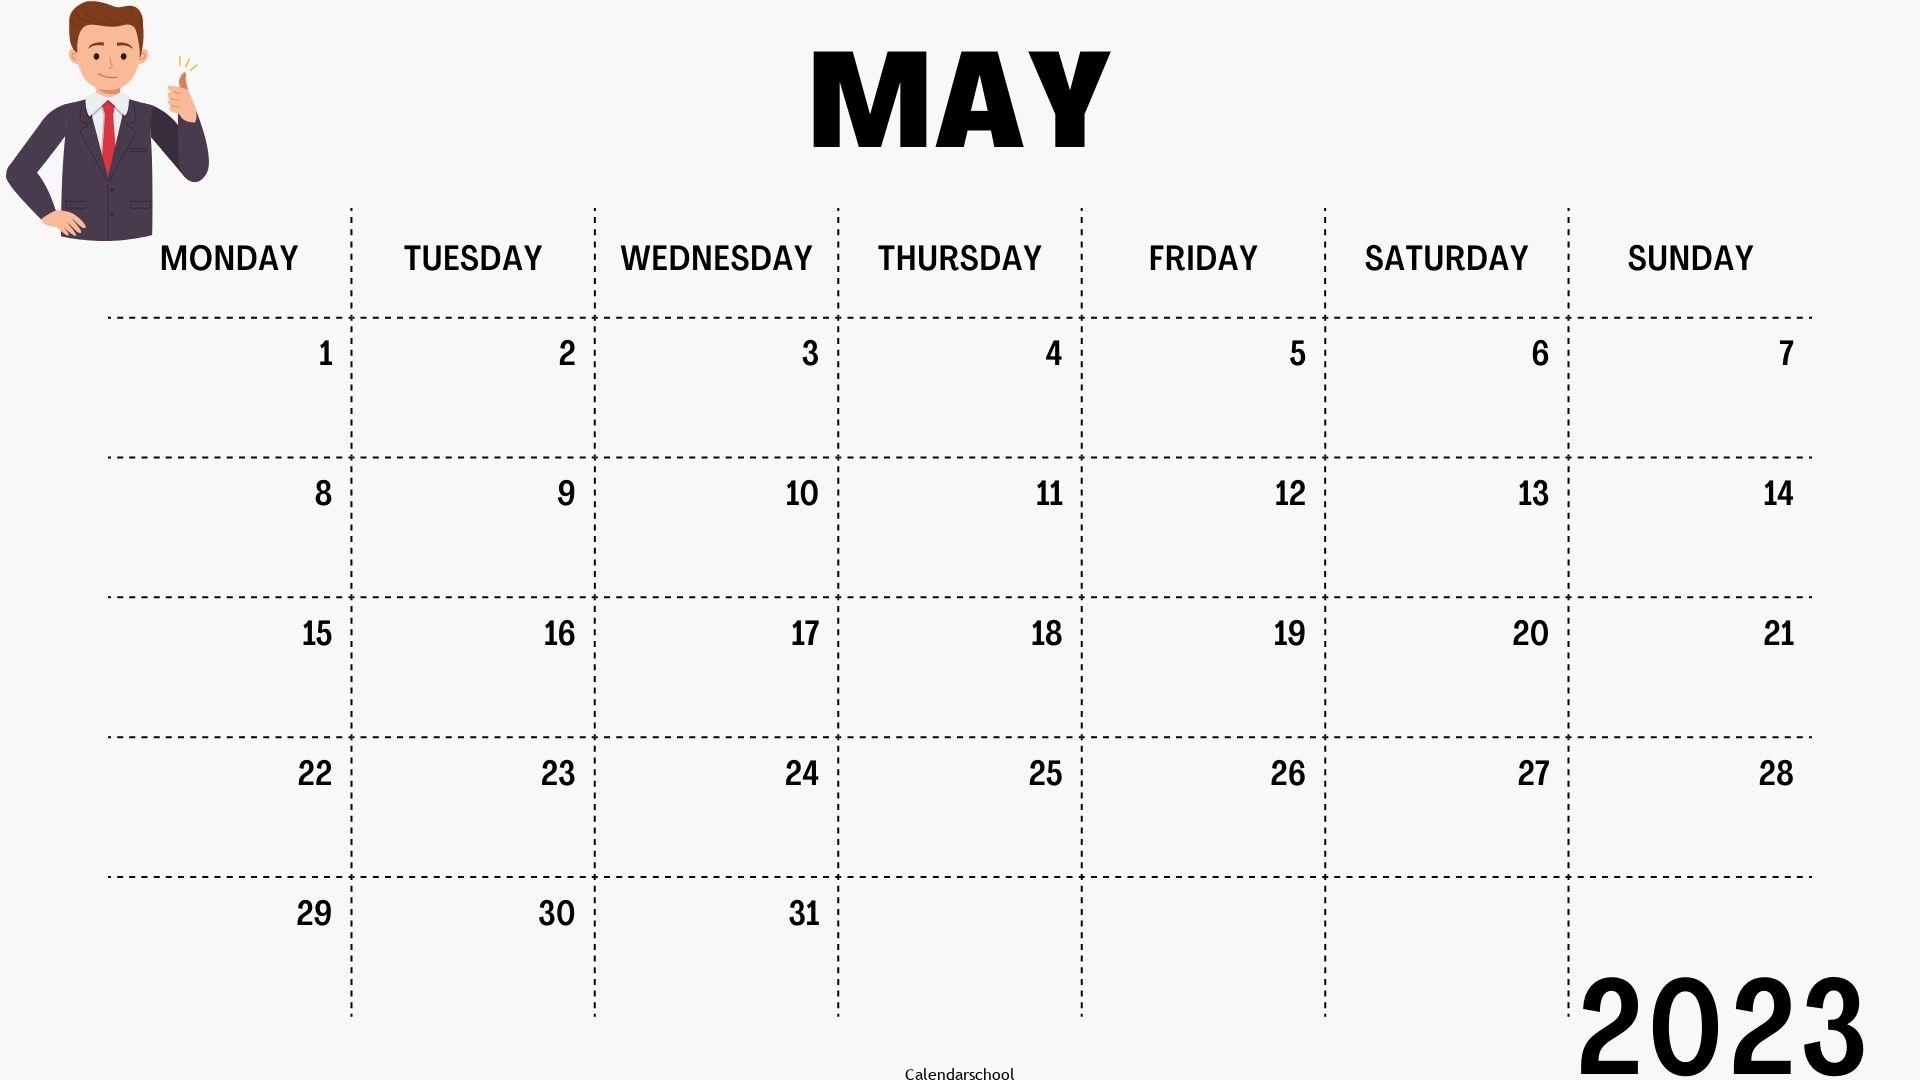 May Calendar 2023 With Holidays